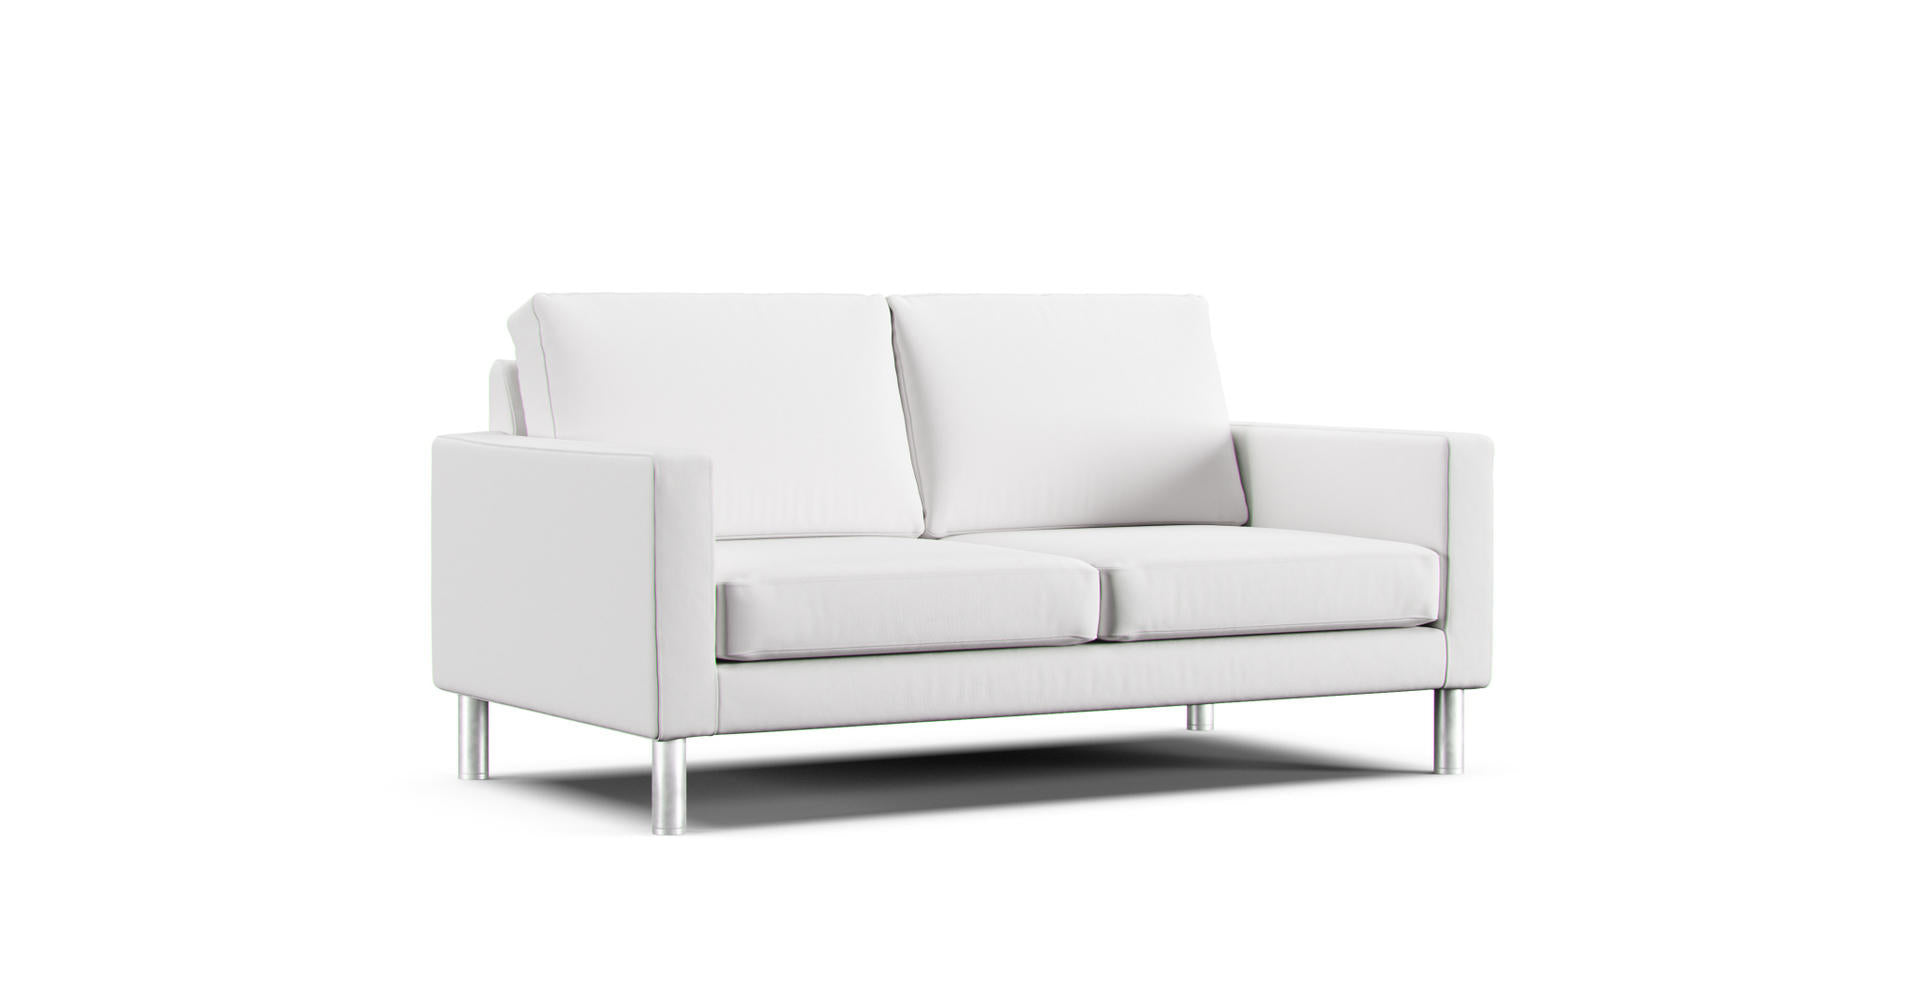 MUJI Leather sofa featuring white Cotton Canvas slipcover